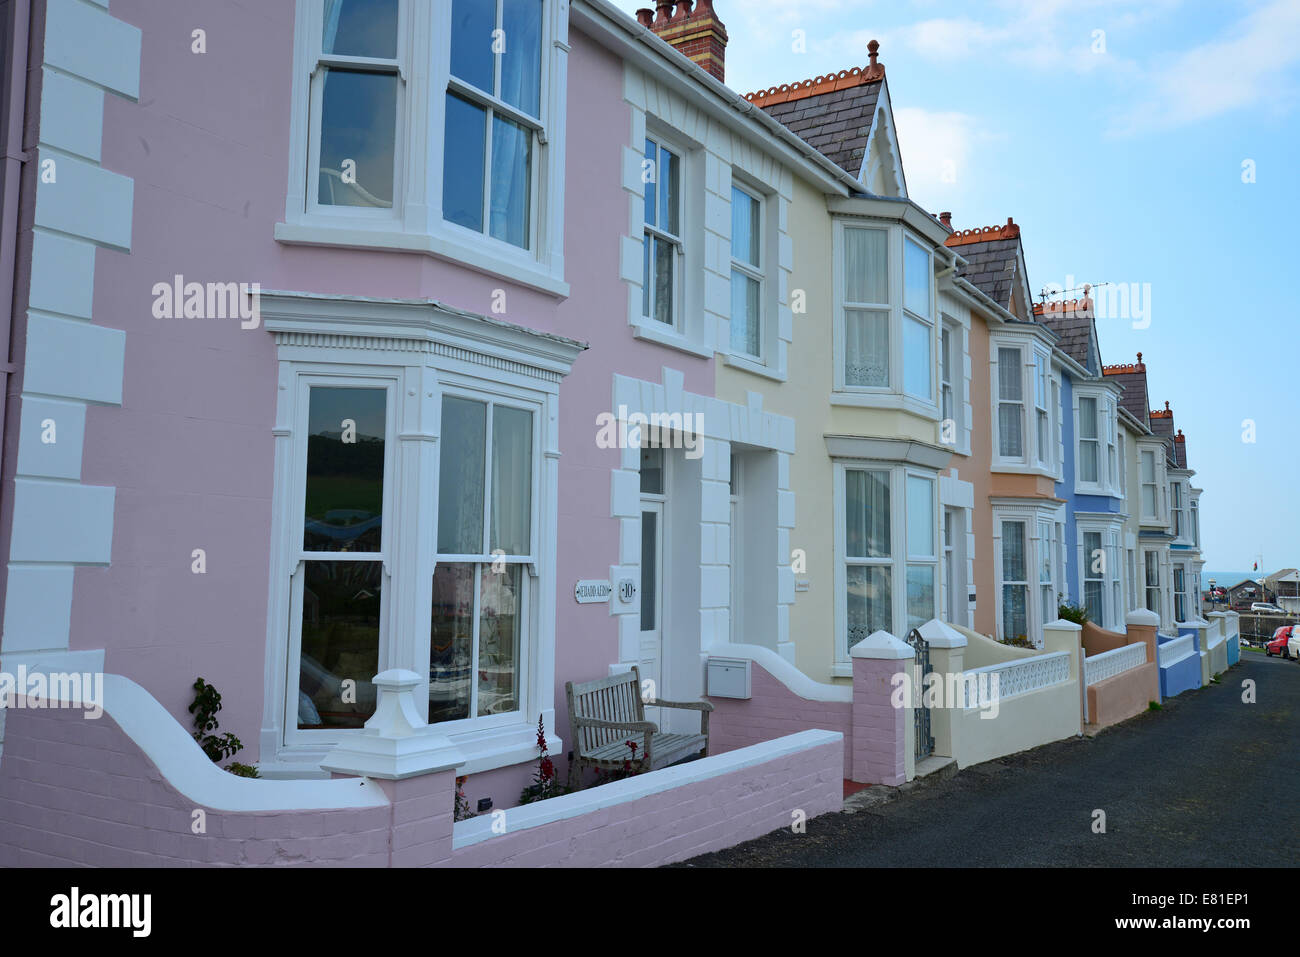 Row of terraced houses, Belle View Terrace, Aberaeron, Ceredigion, Wales, United Kingdom Stock Photo